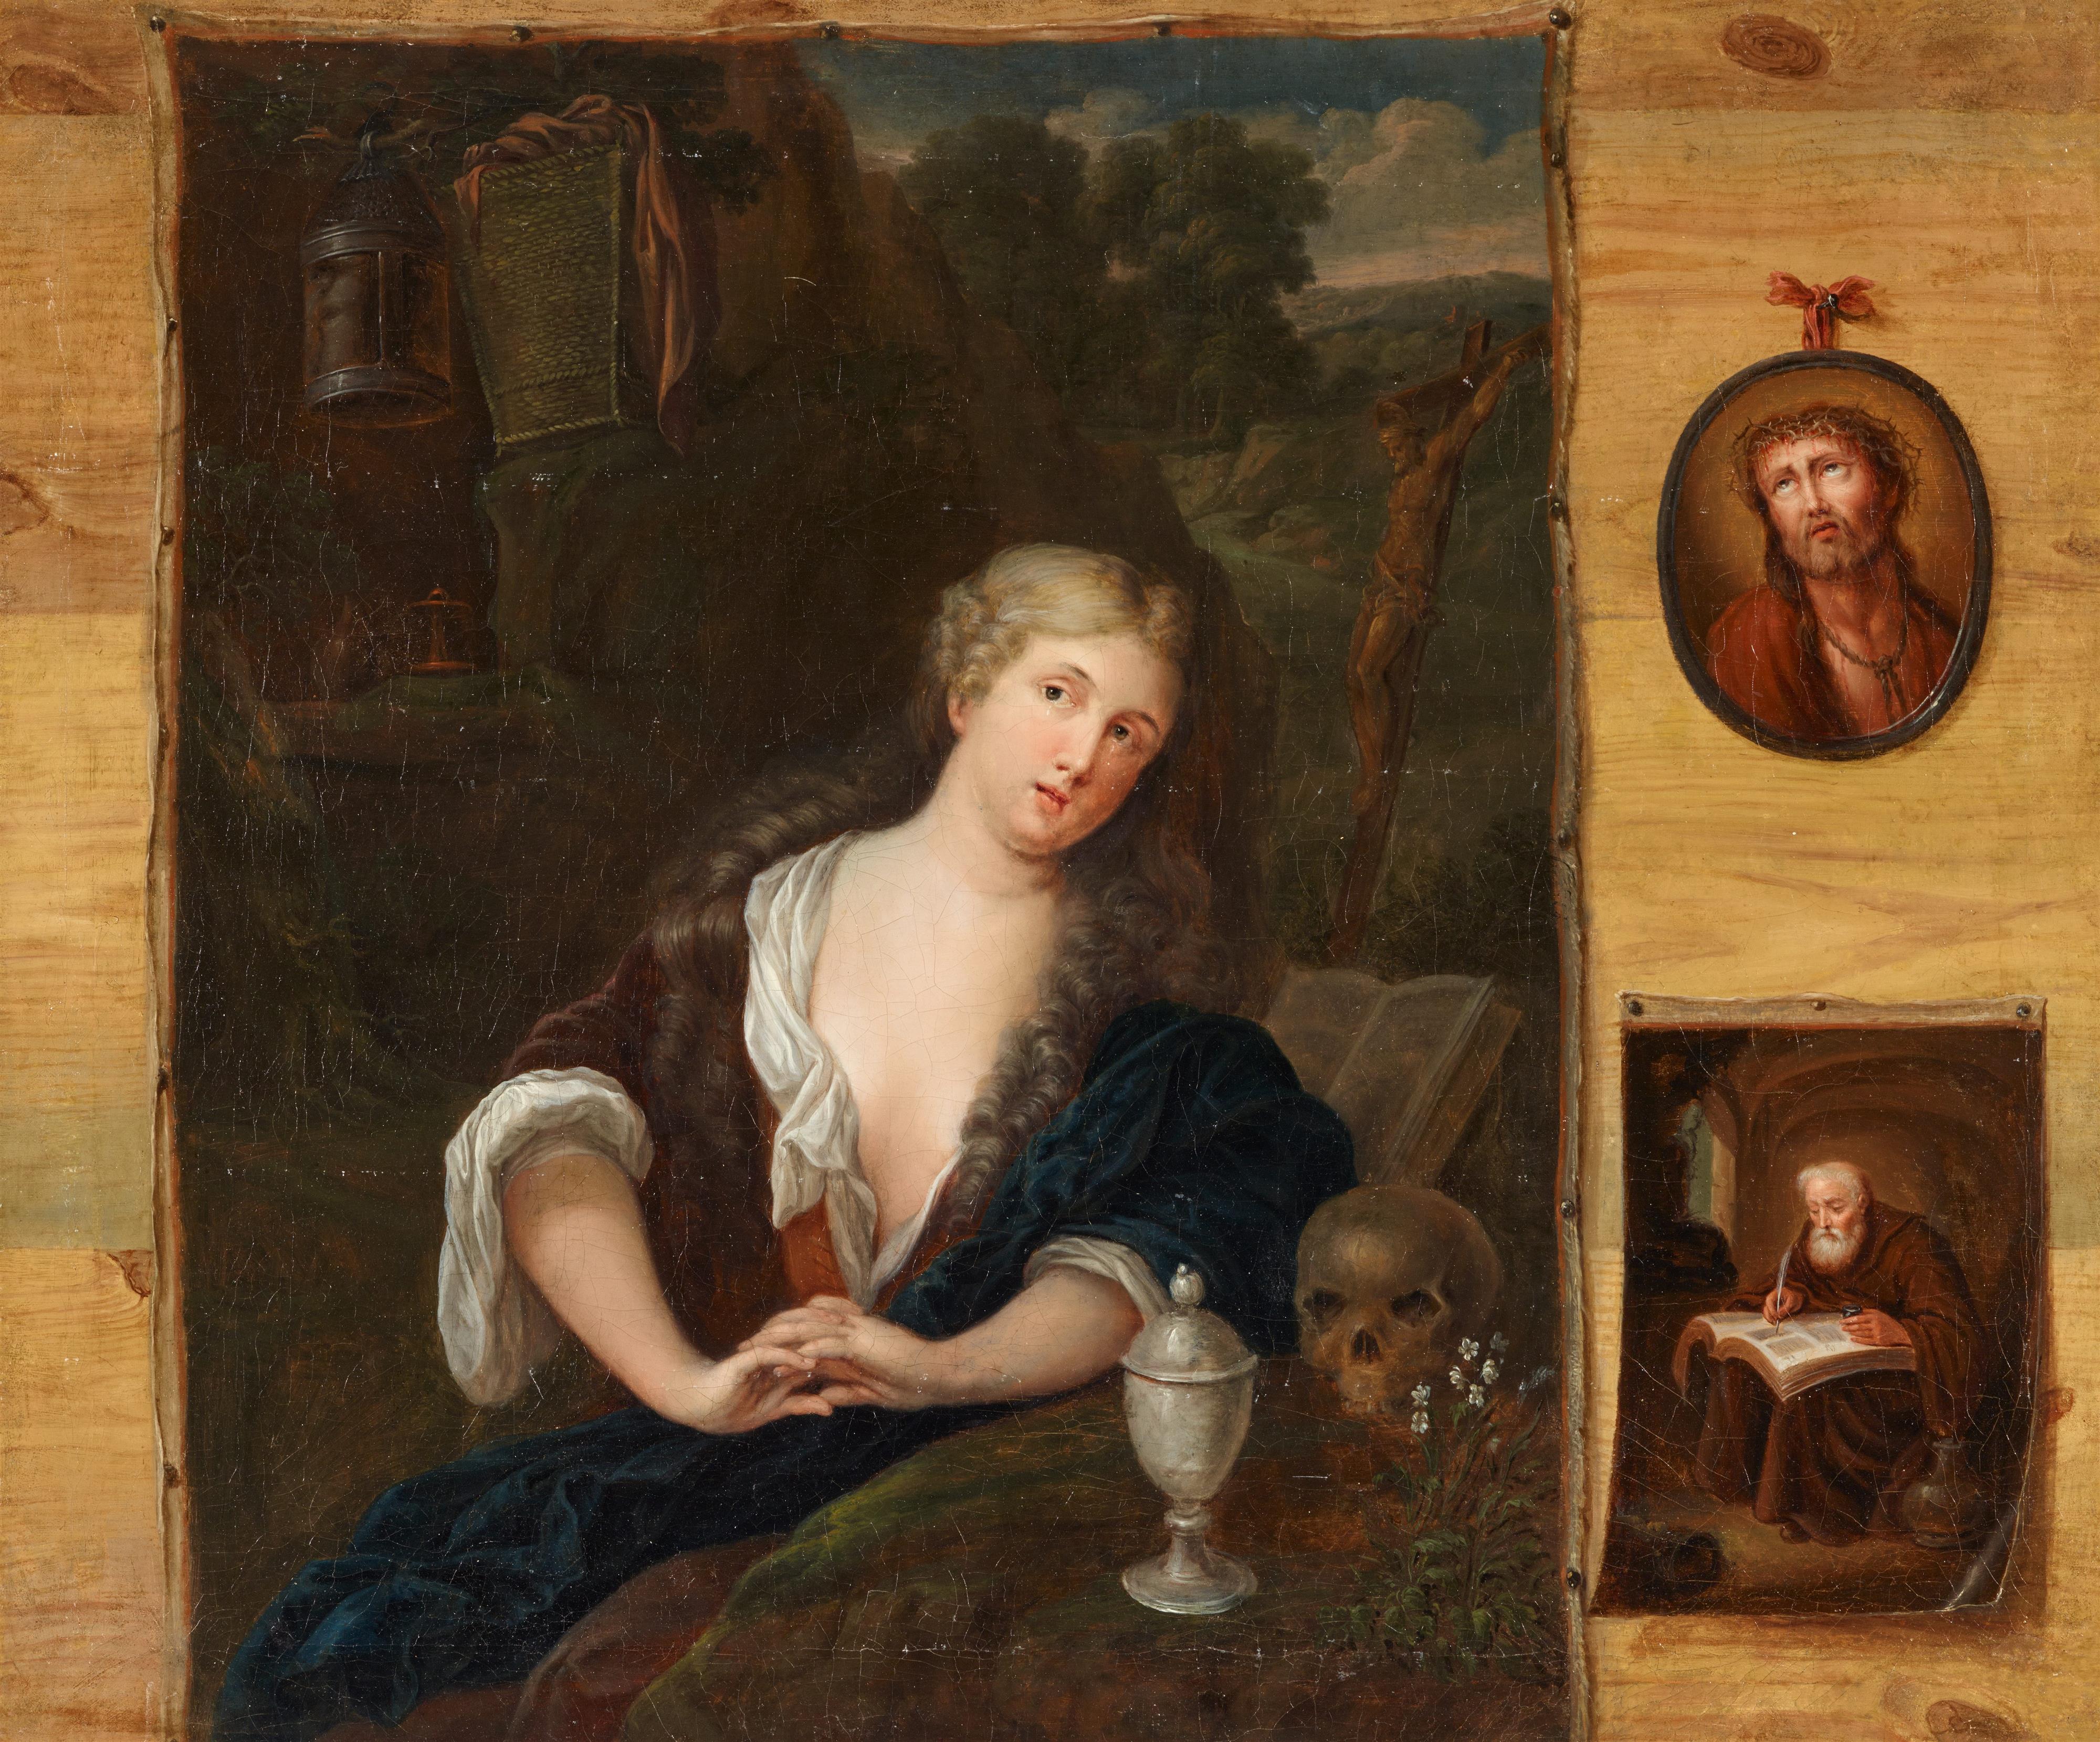 Netherlandish School around 1700 - Trompe l'œil with Mary Magdalene after Eglon van der Neer and two other Pictures - image-1